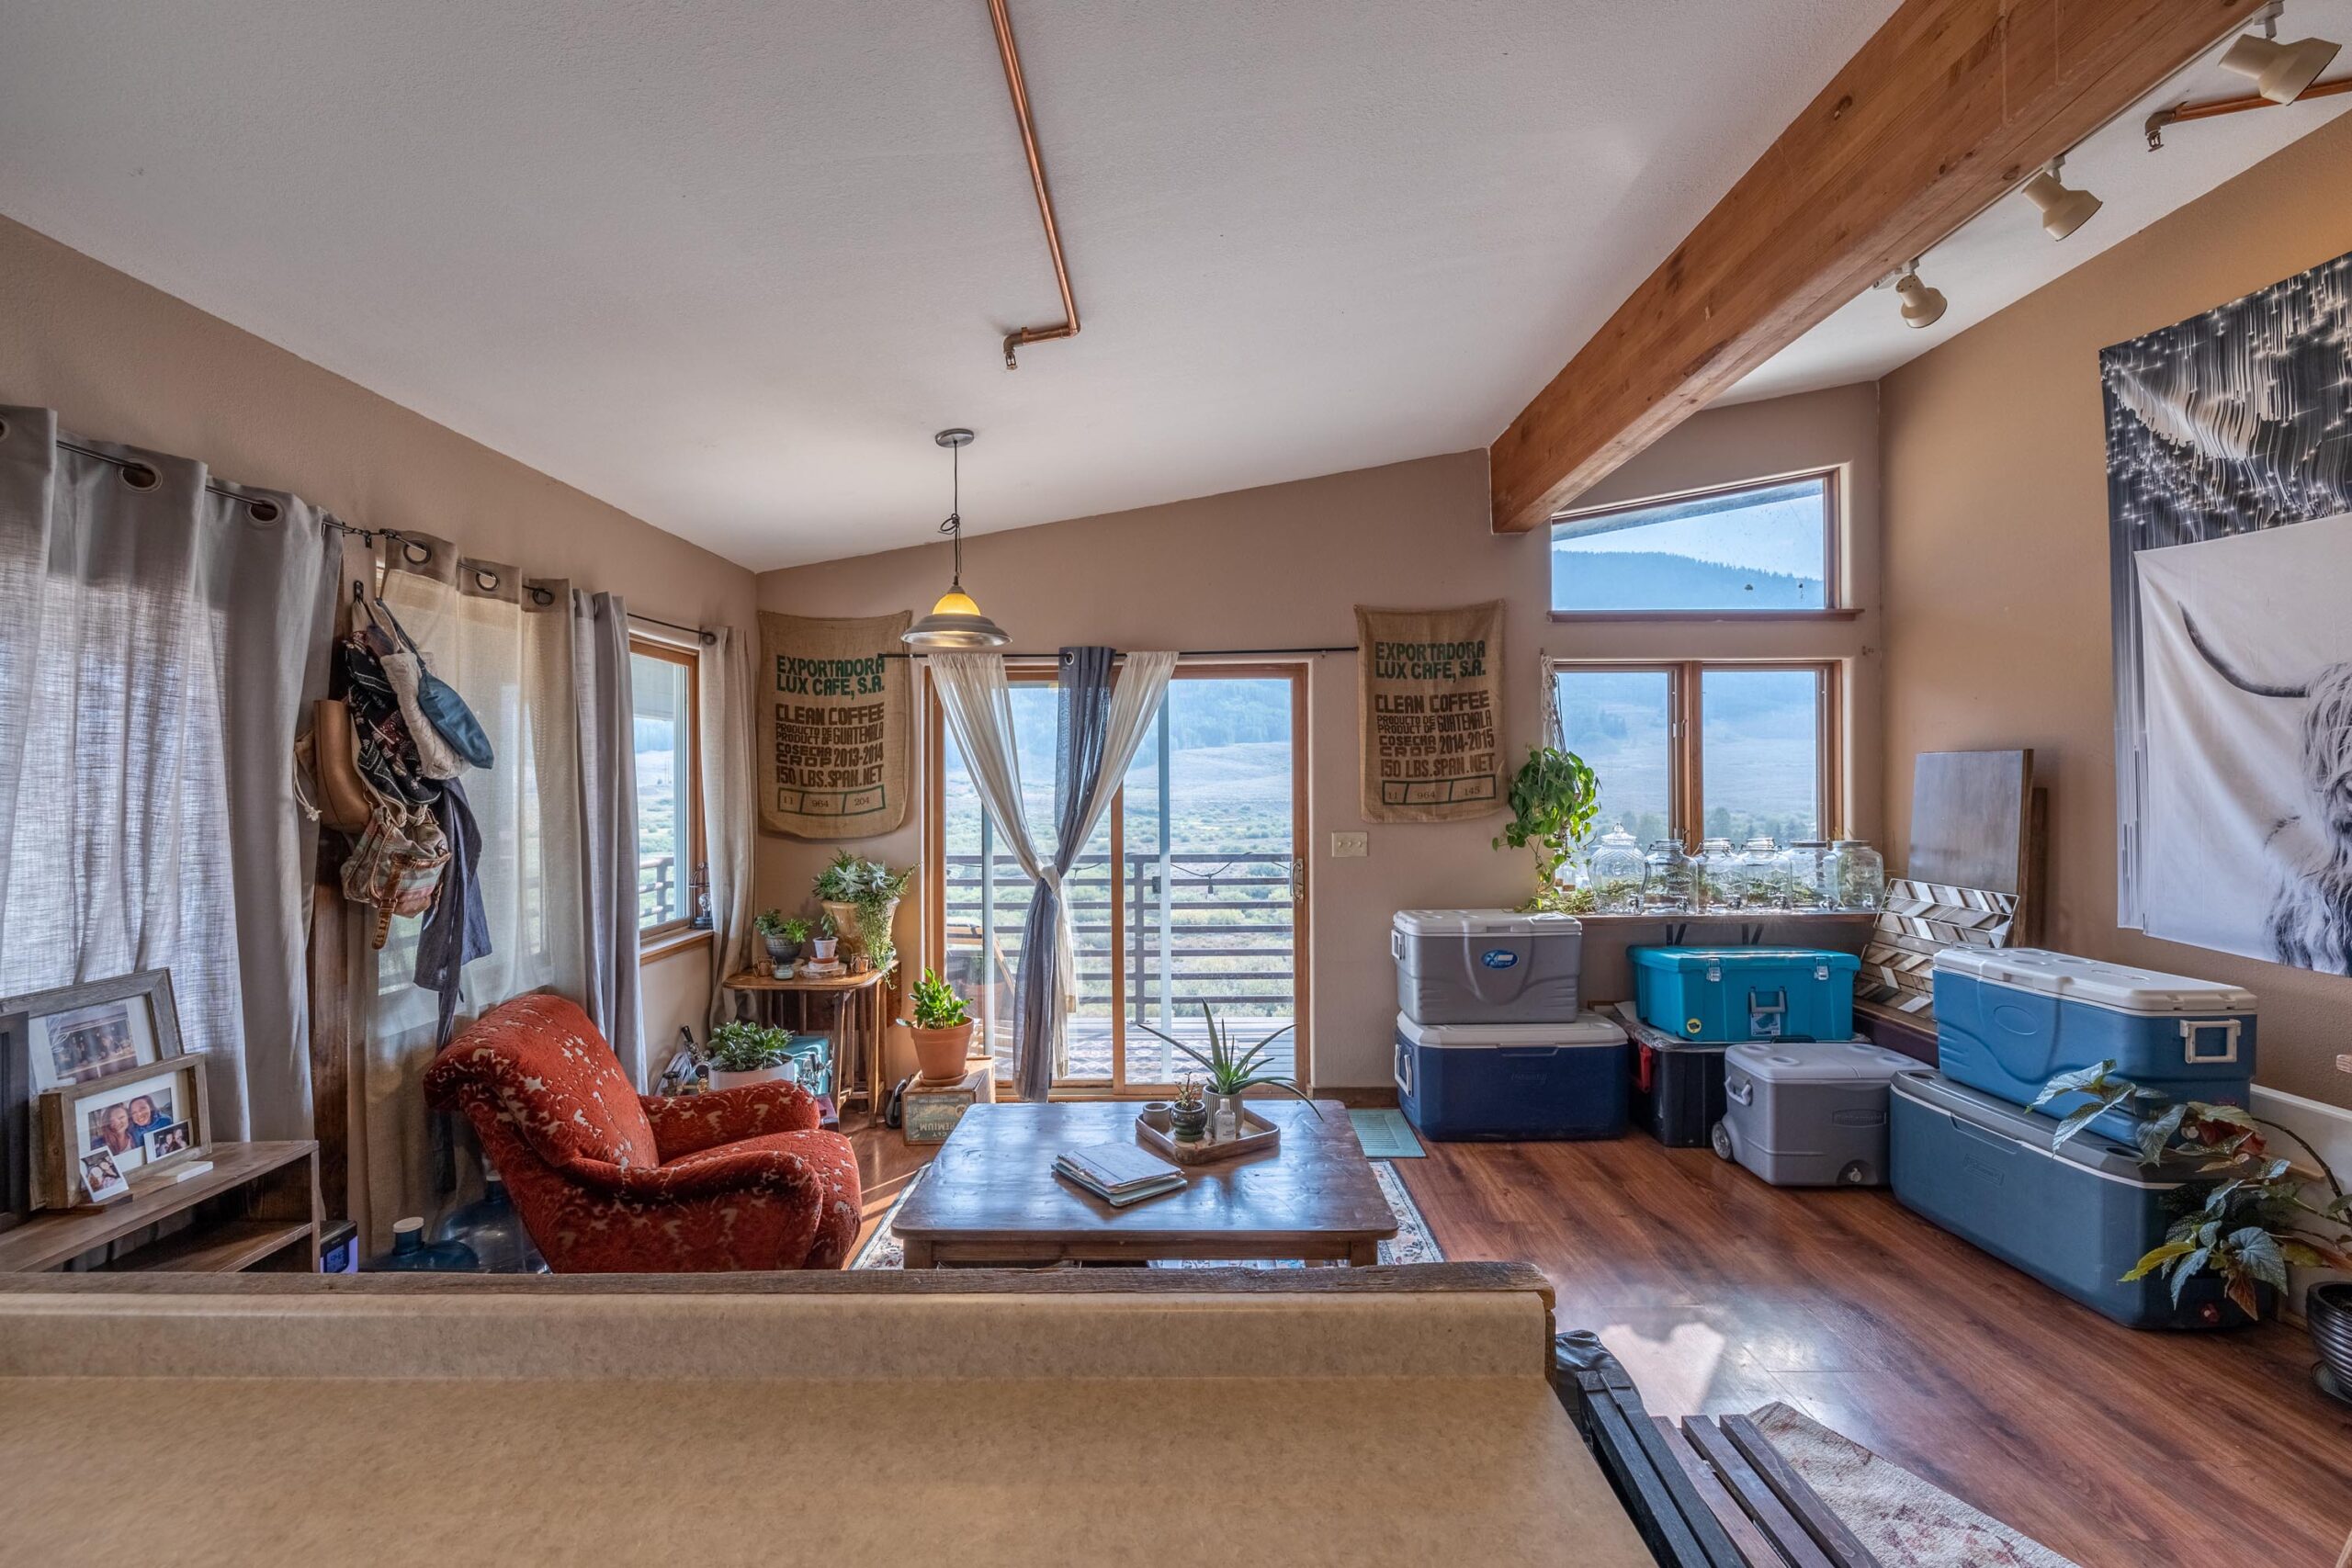 571 Riverland Drive, Crested Butte Colorado - apartment living room